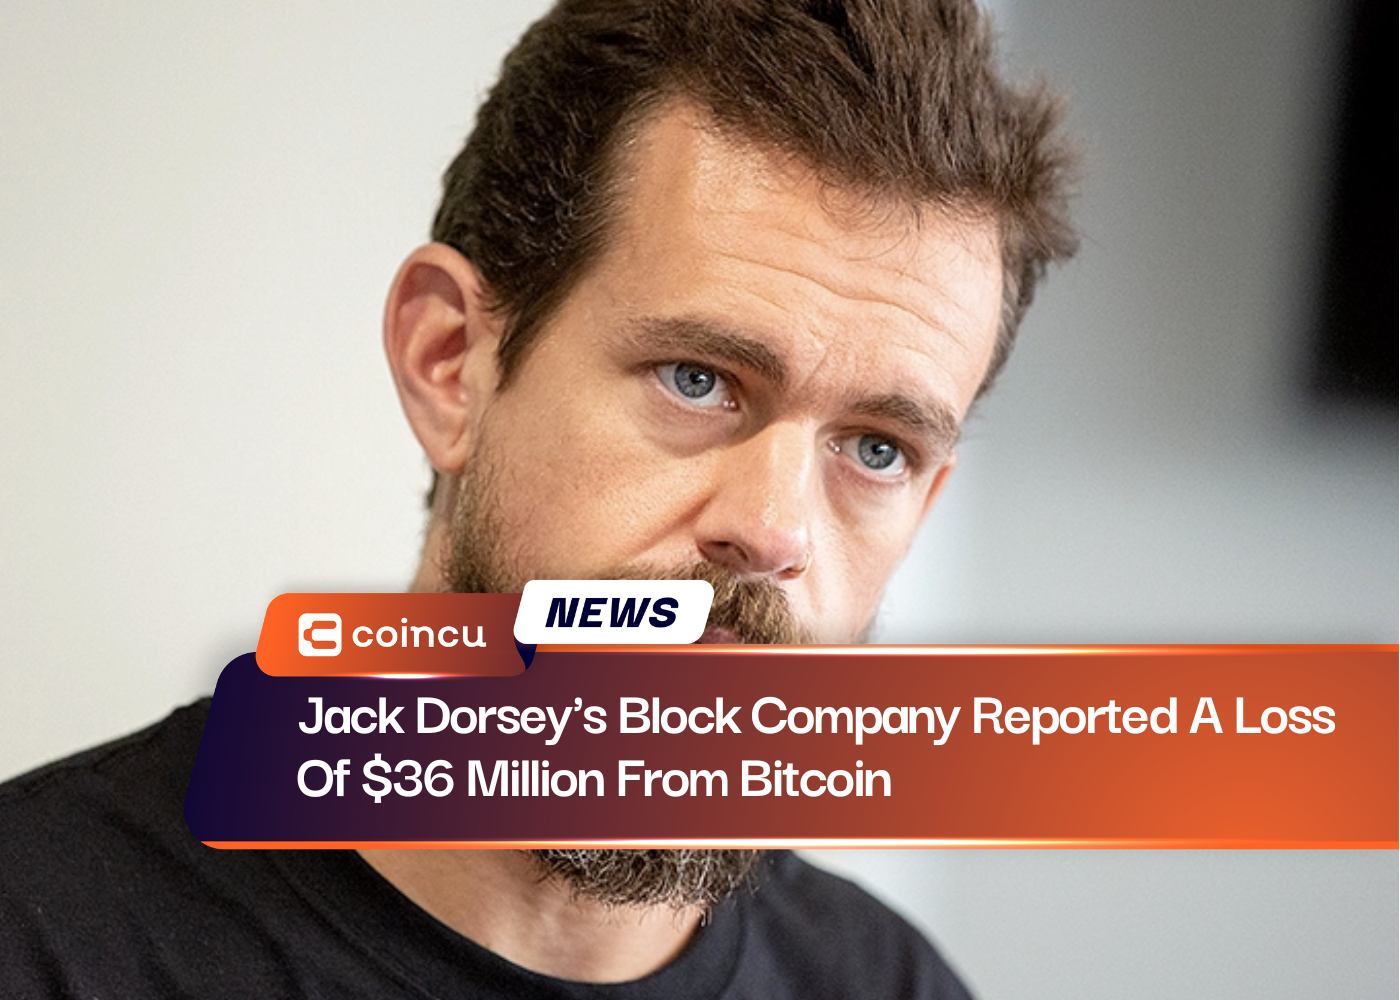 Jack Dorsey's Block Company Reported A Loss Of $36 Million From Bitcoin